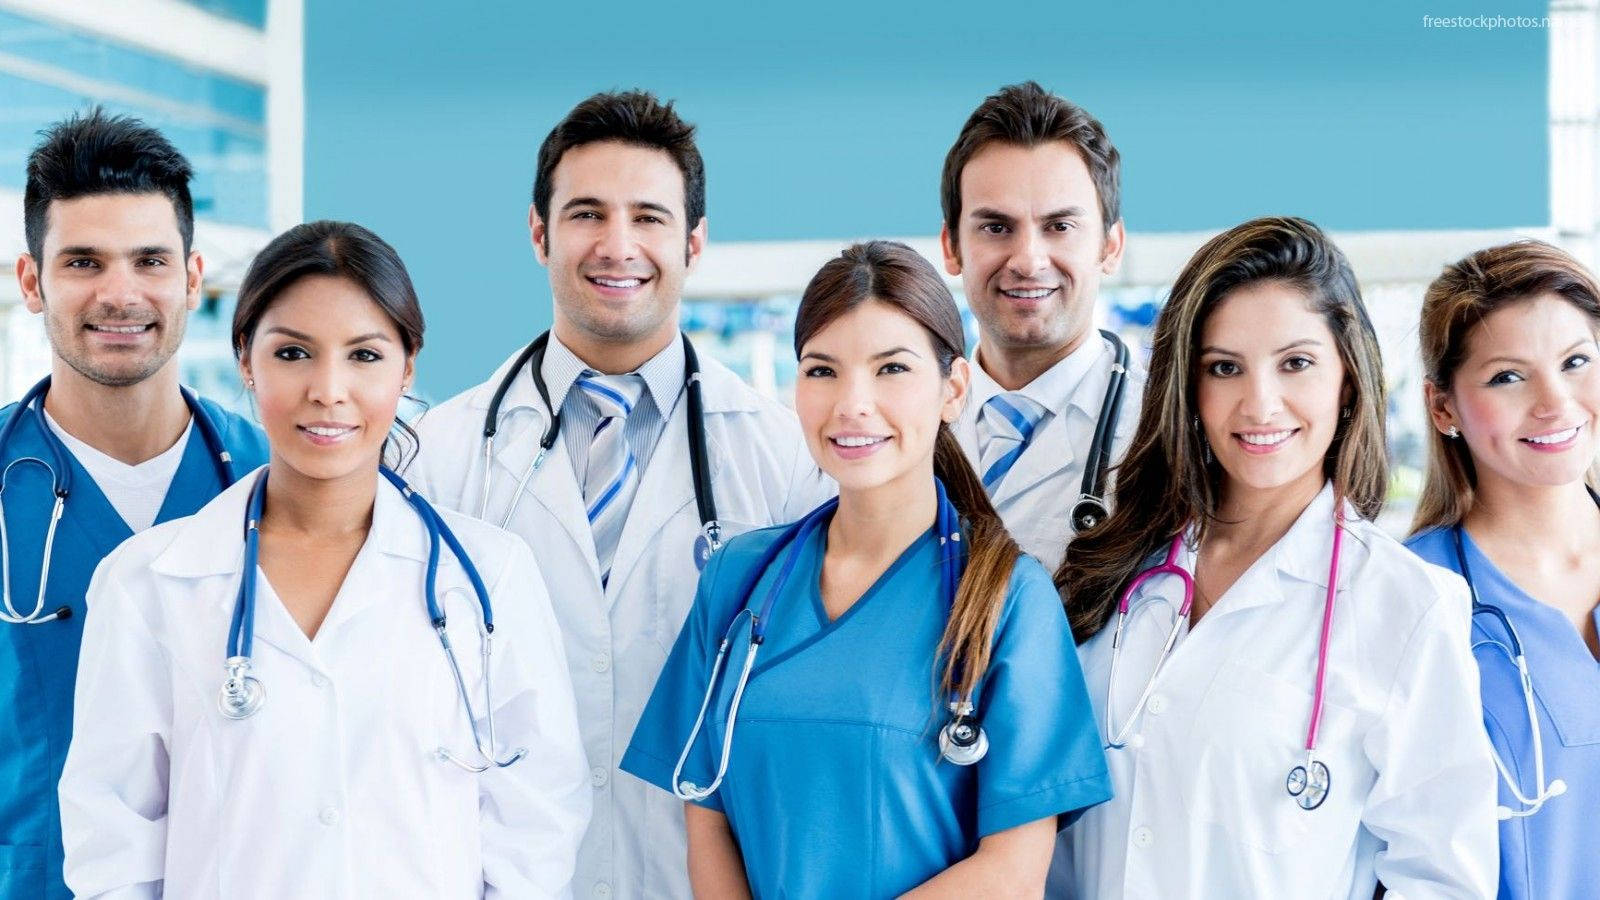 Committed Healthcare Professionals Wallpaper